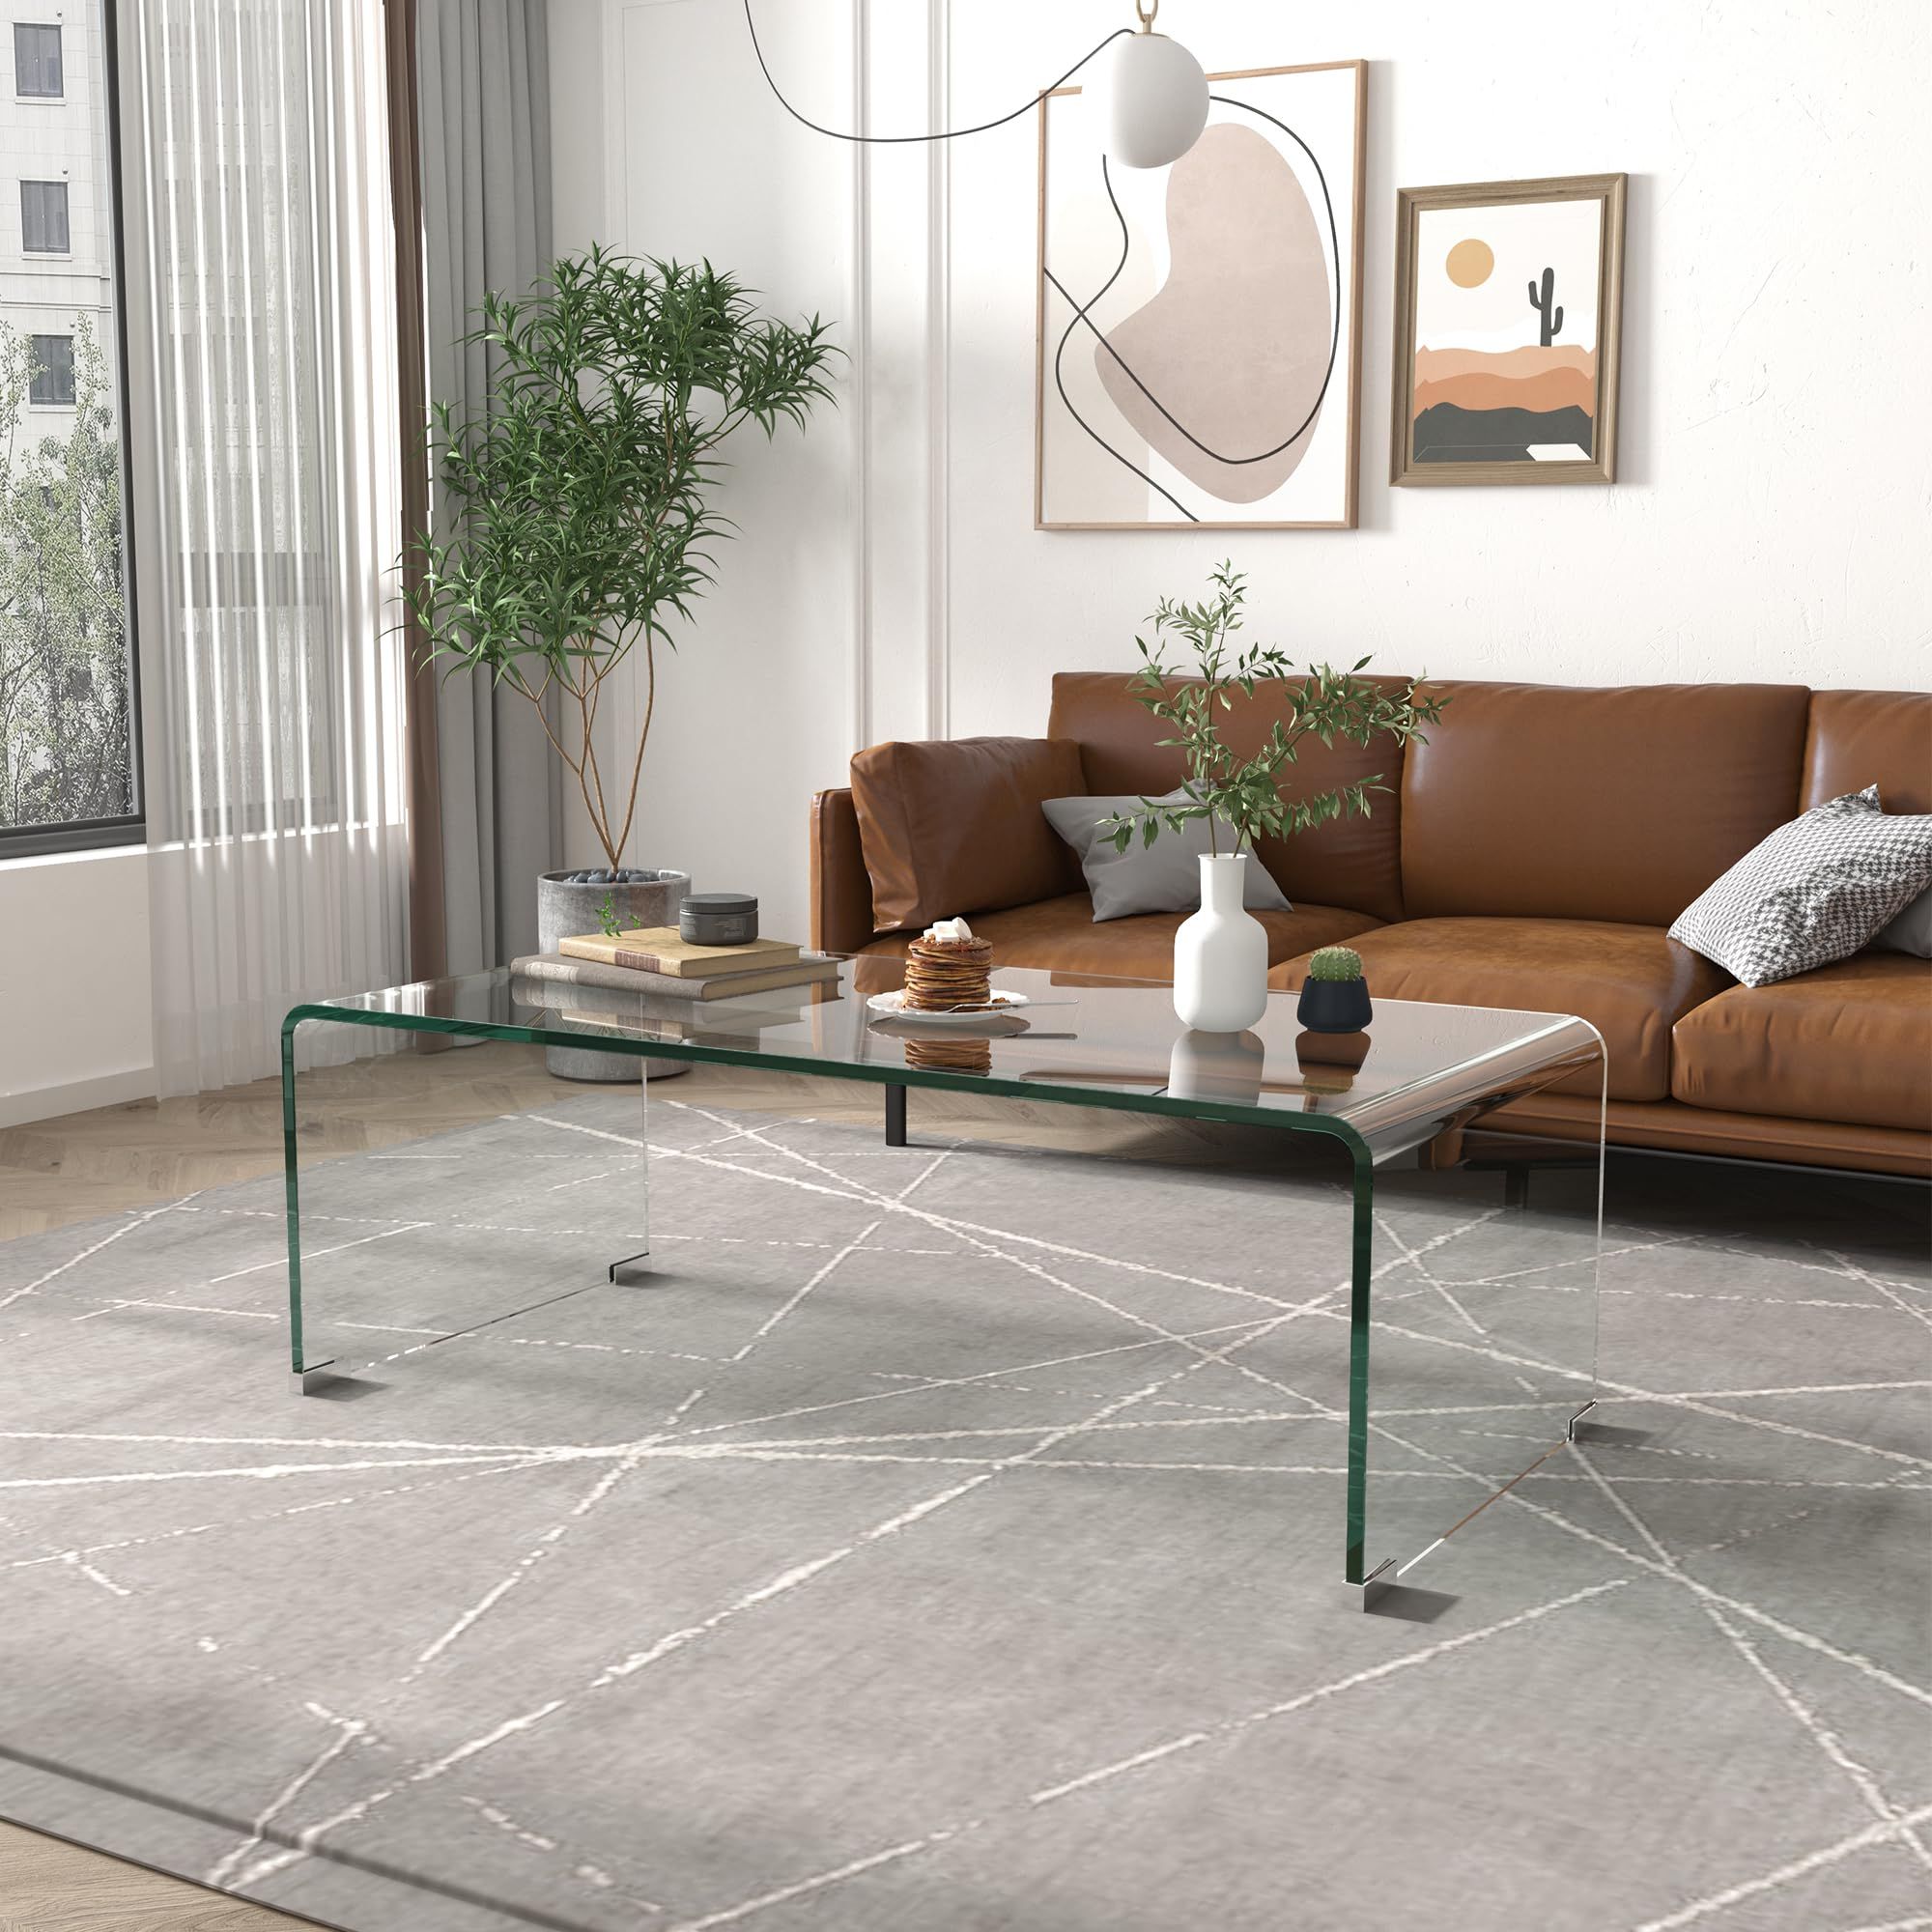 Tempered Glass Coffee Tables For Most Popular Amazon: Tempered Glass Coffee Table For Modern Living Room Decor, Easy  To Clean With Safe Rounded Edges And Durable Design, 39.3" L X 19.6" W X   (View 9 of 10)